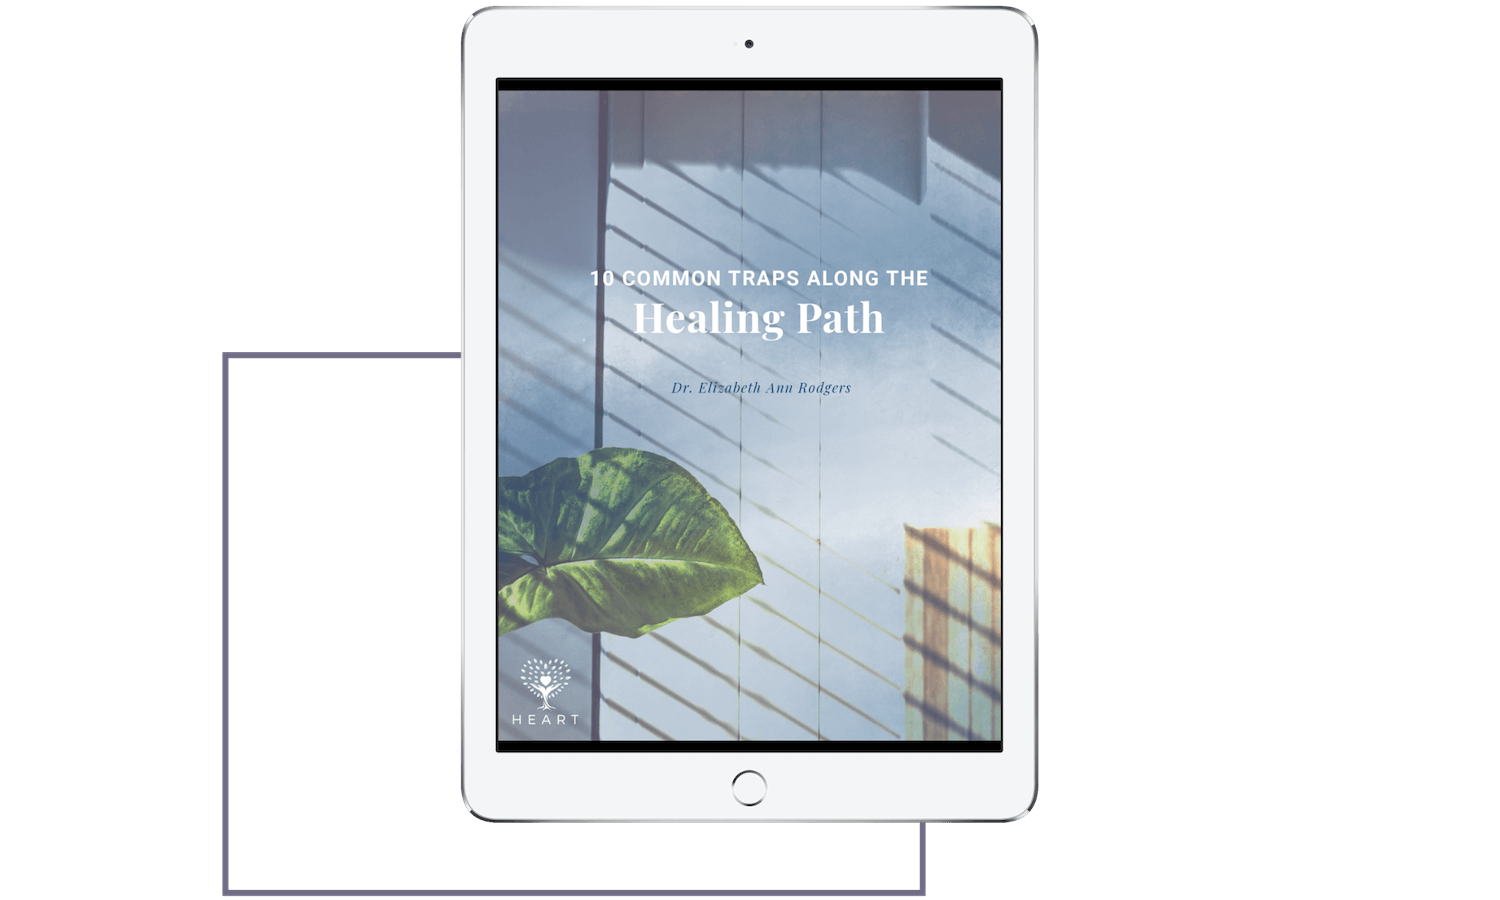 holistic health coach - 10 Common Traps Along the Healing Path free download mockup.png